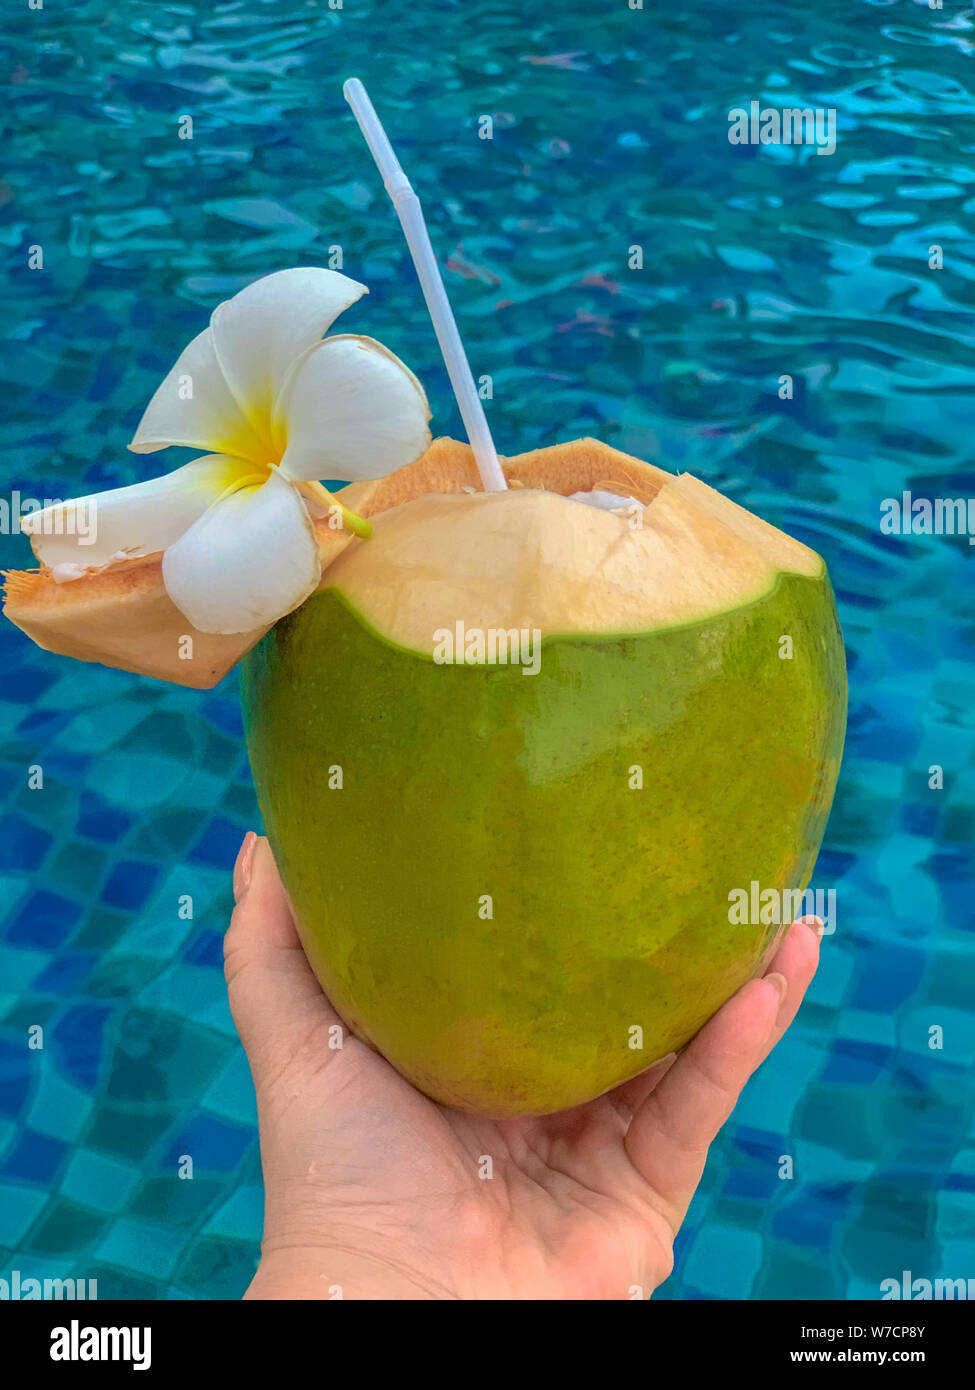 vertical, photo, tropical, pool, coconut, summer, water, green, straw, vacation, relaxation, juice, fresh, beautiful, nature, drink, female, backgroun Stock Photo